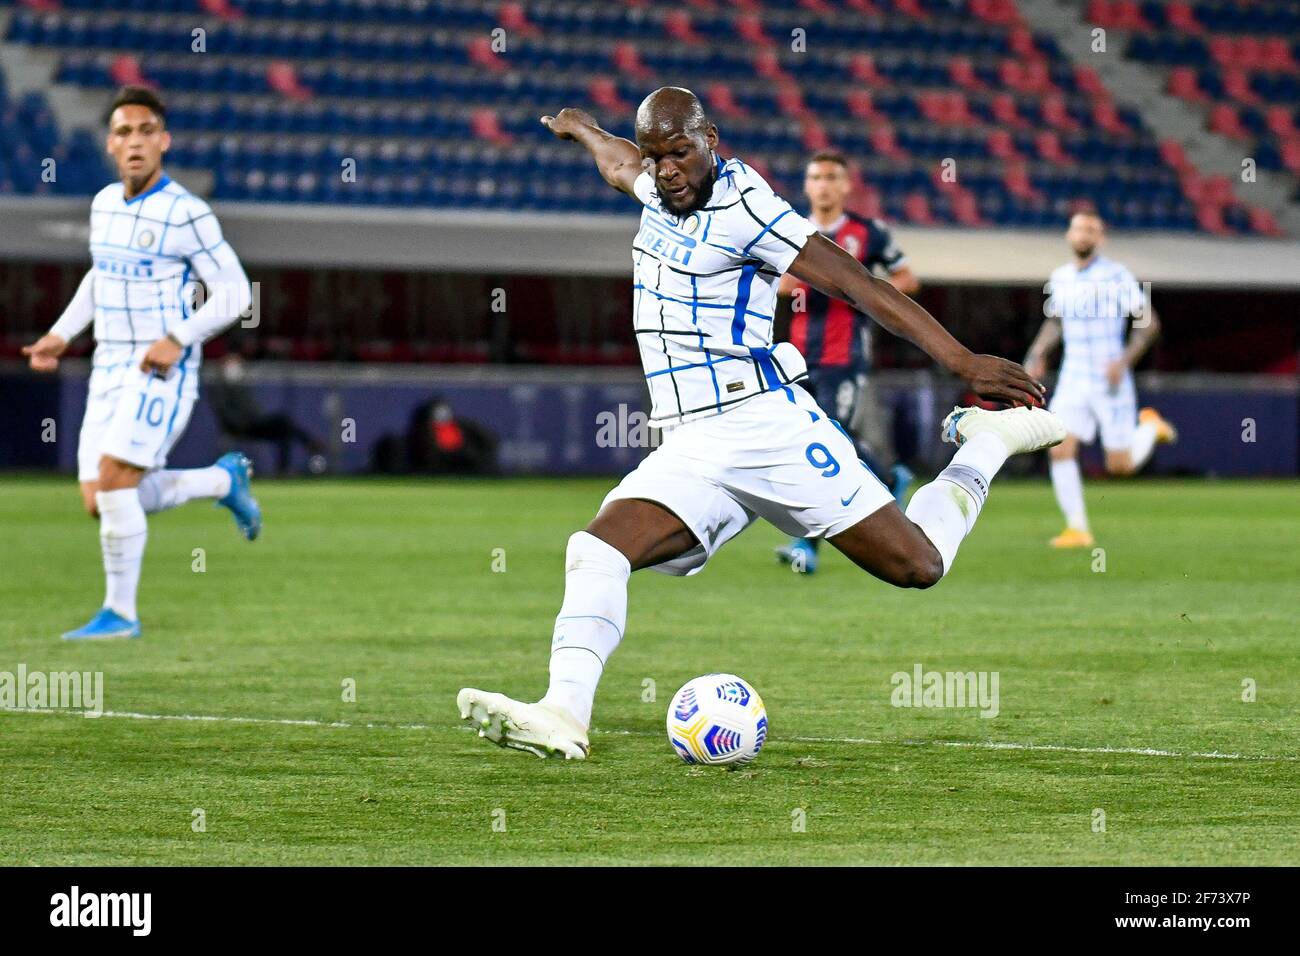 Bologna, Italy. 03rd Apr, 2021. Romelu Lukaku (Inter - Internazionale) in action during Bologna FC vs Inter - FC Internazionale, Italian football Serie A match in Bologna, Italy, April 03 2021 Credit: Independent Photo Agency/Alamy Live News Stock Photo